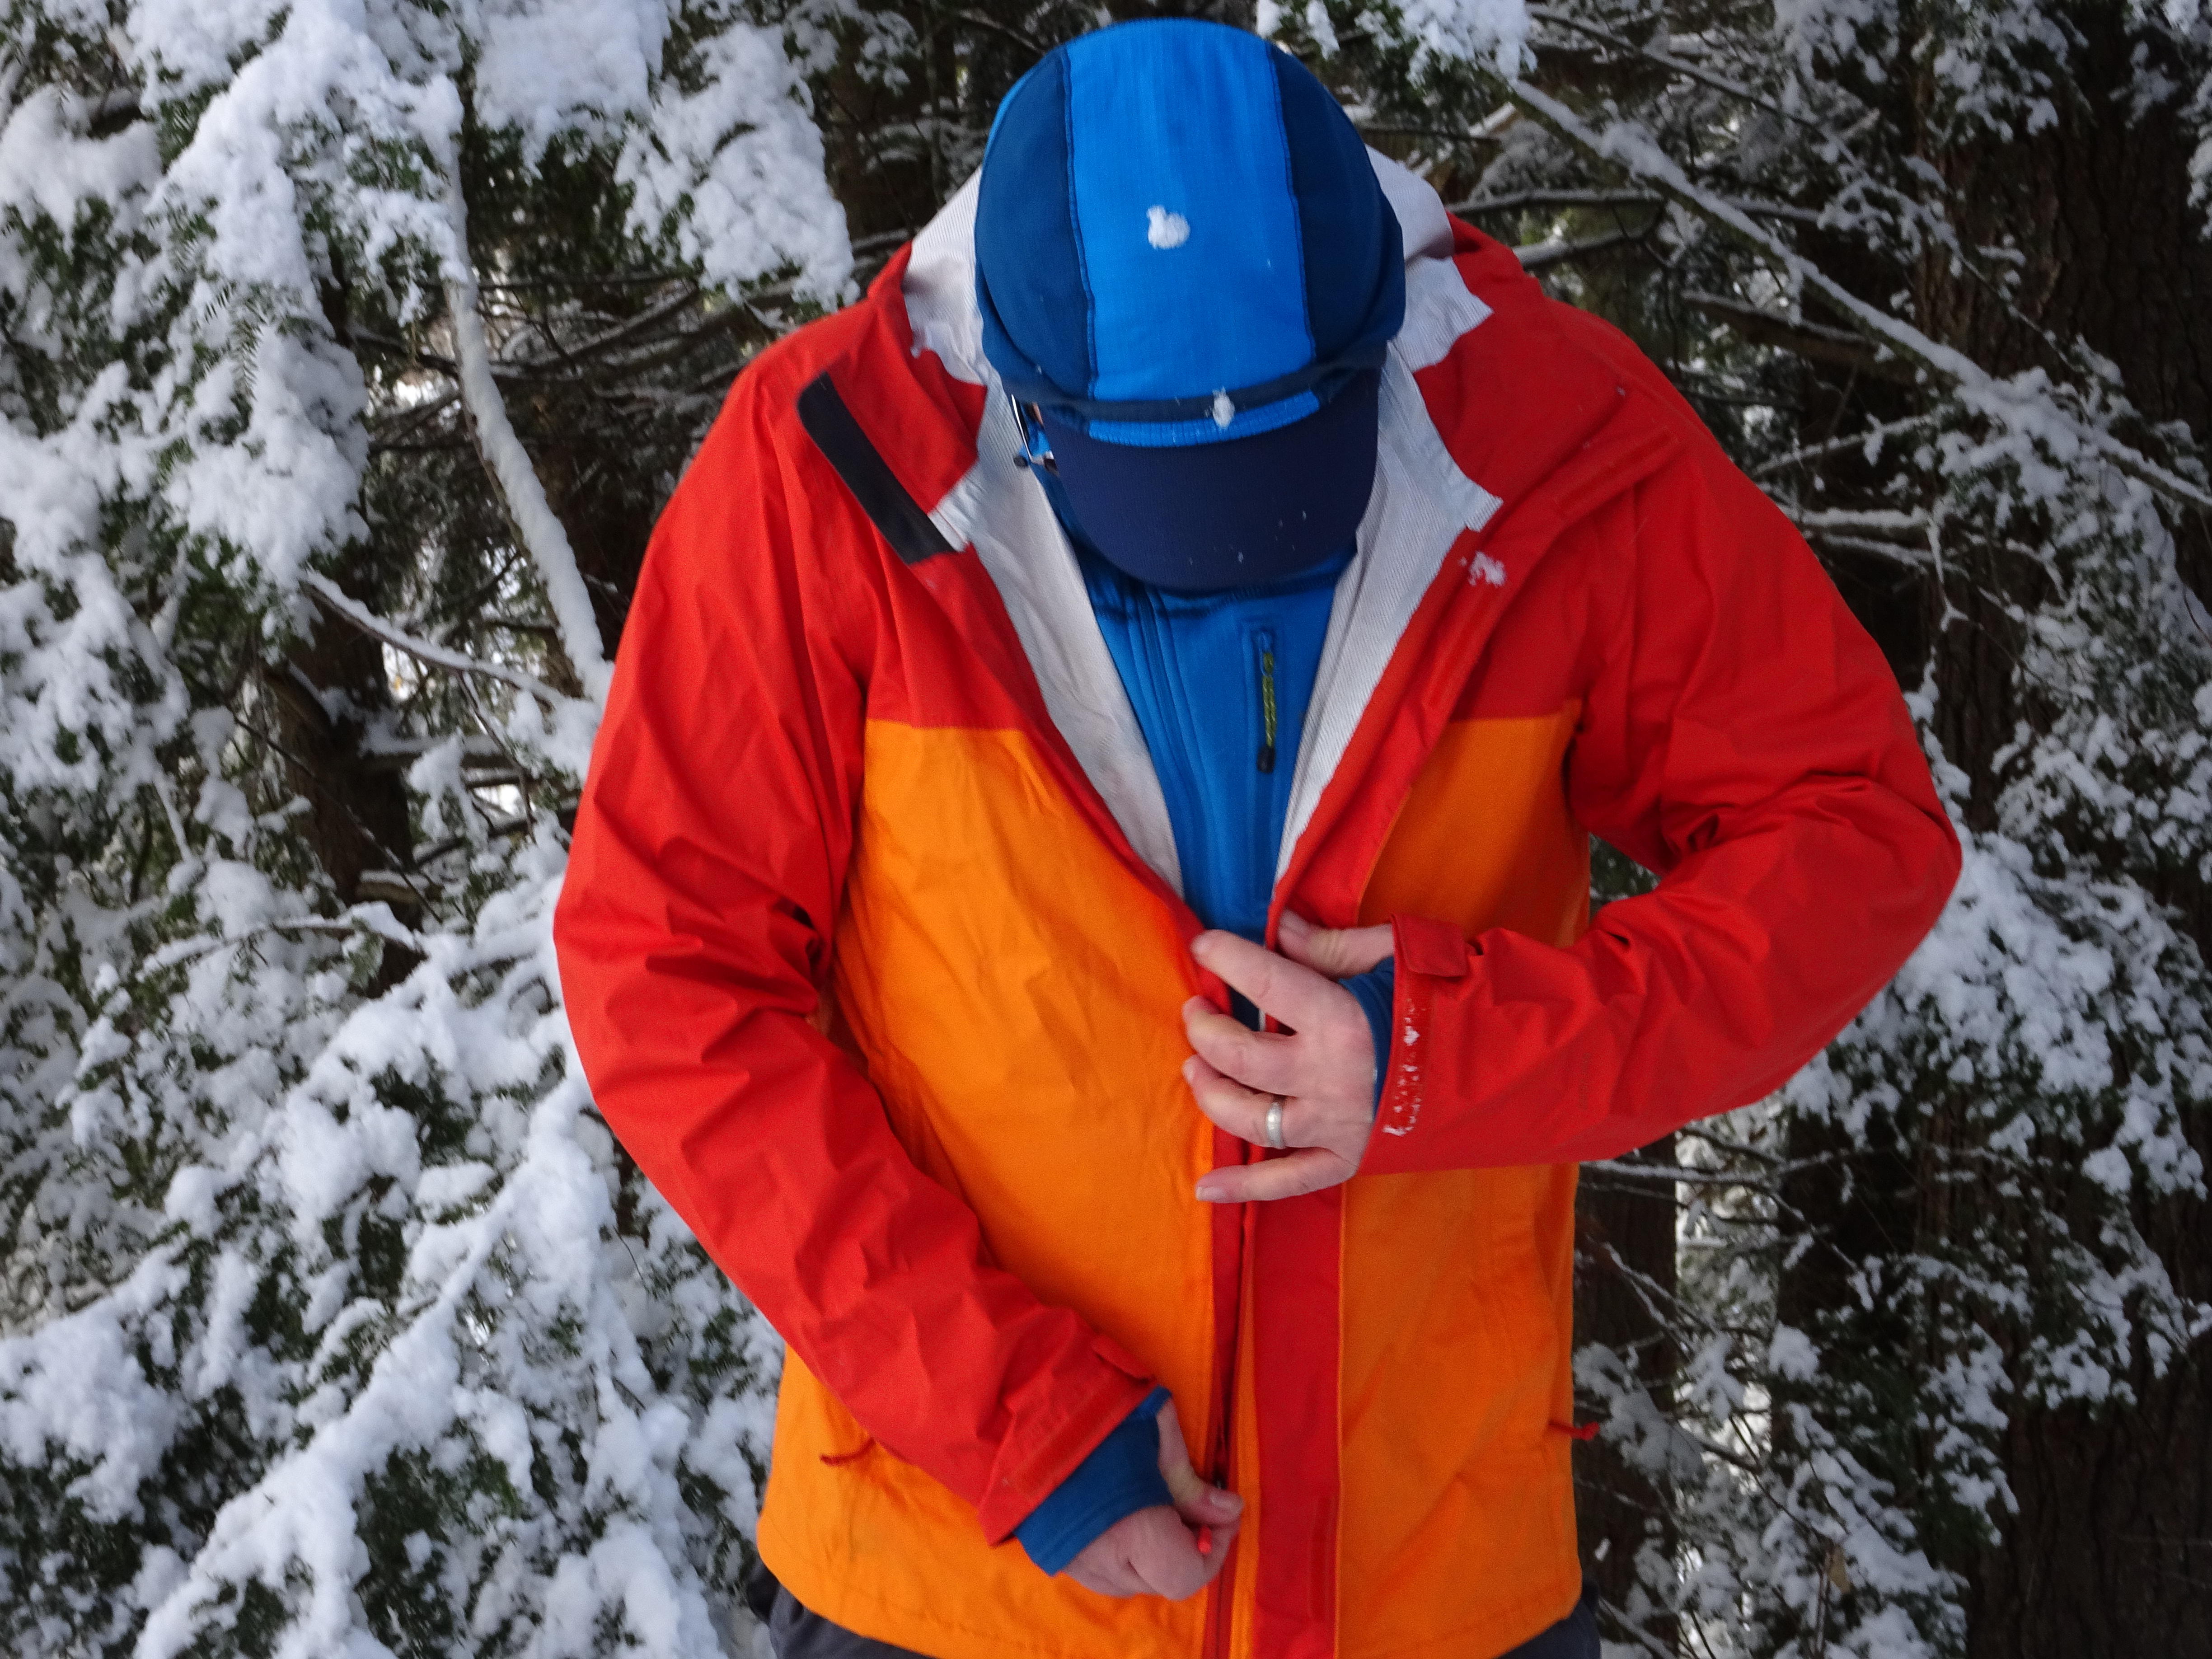 north face venture jacket review